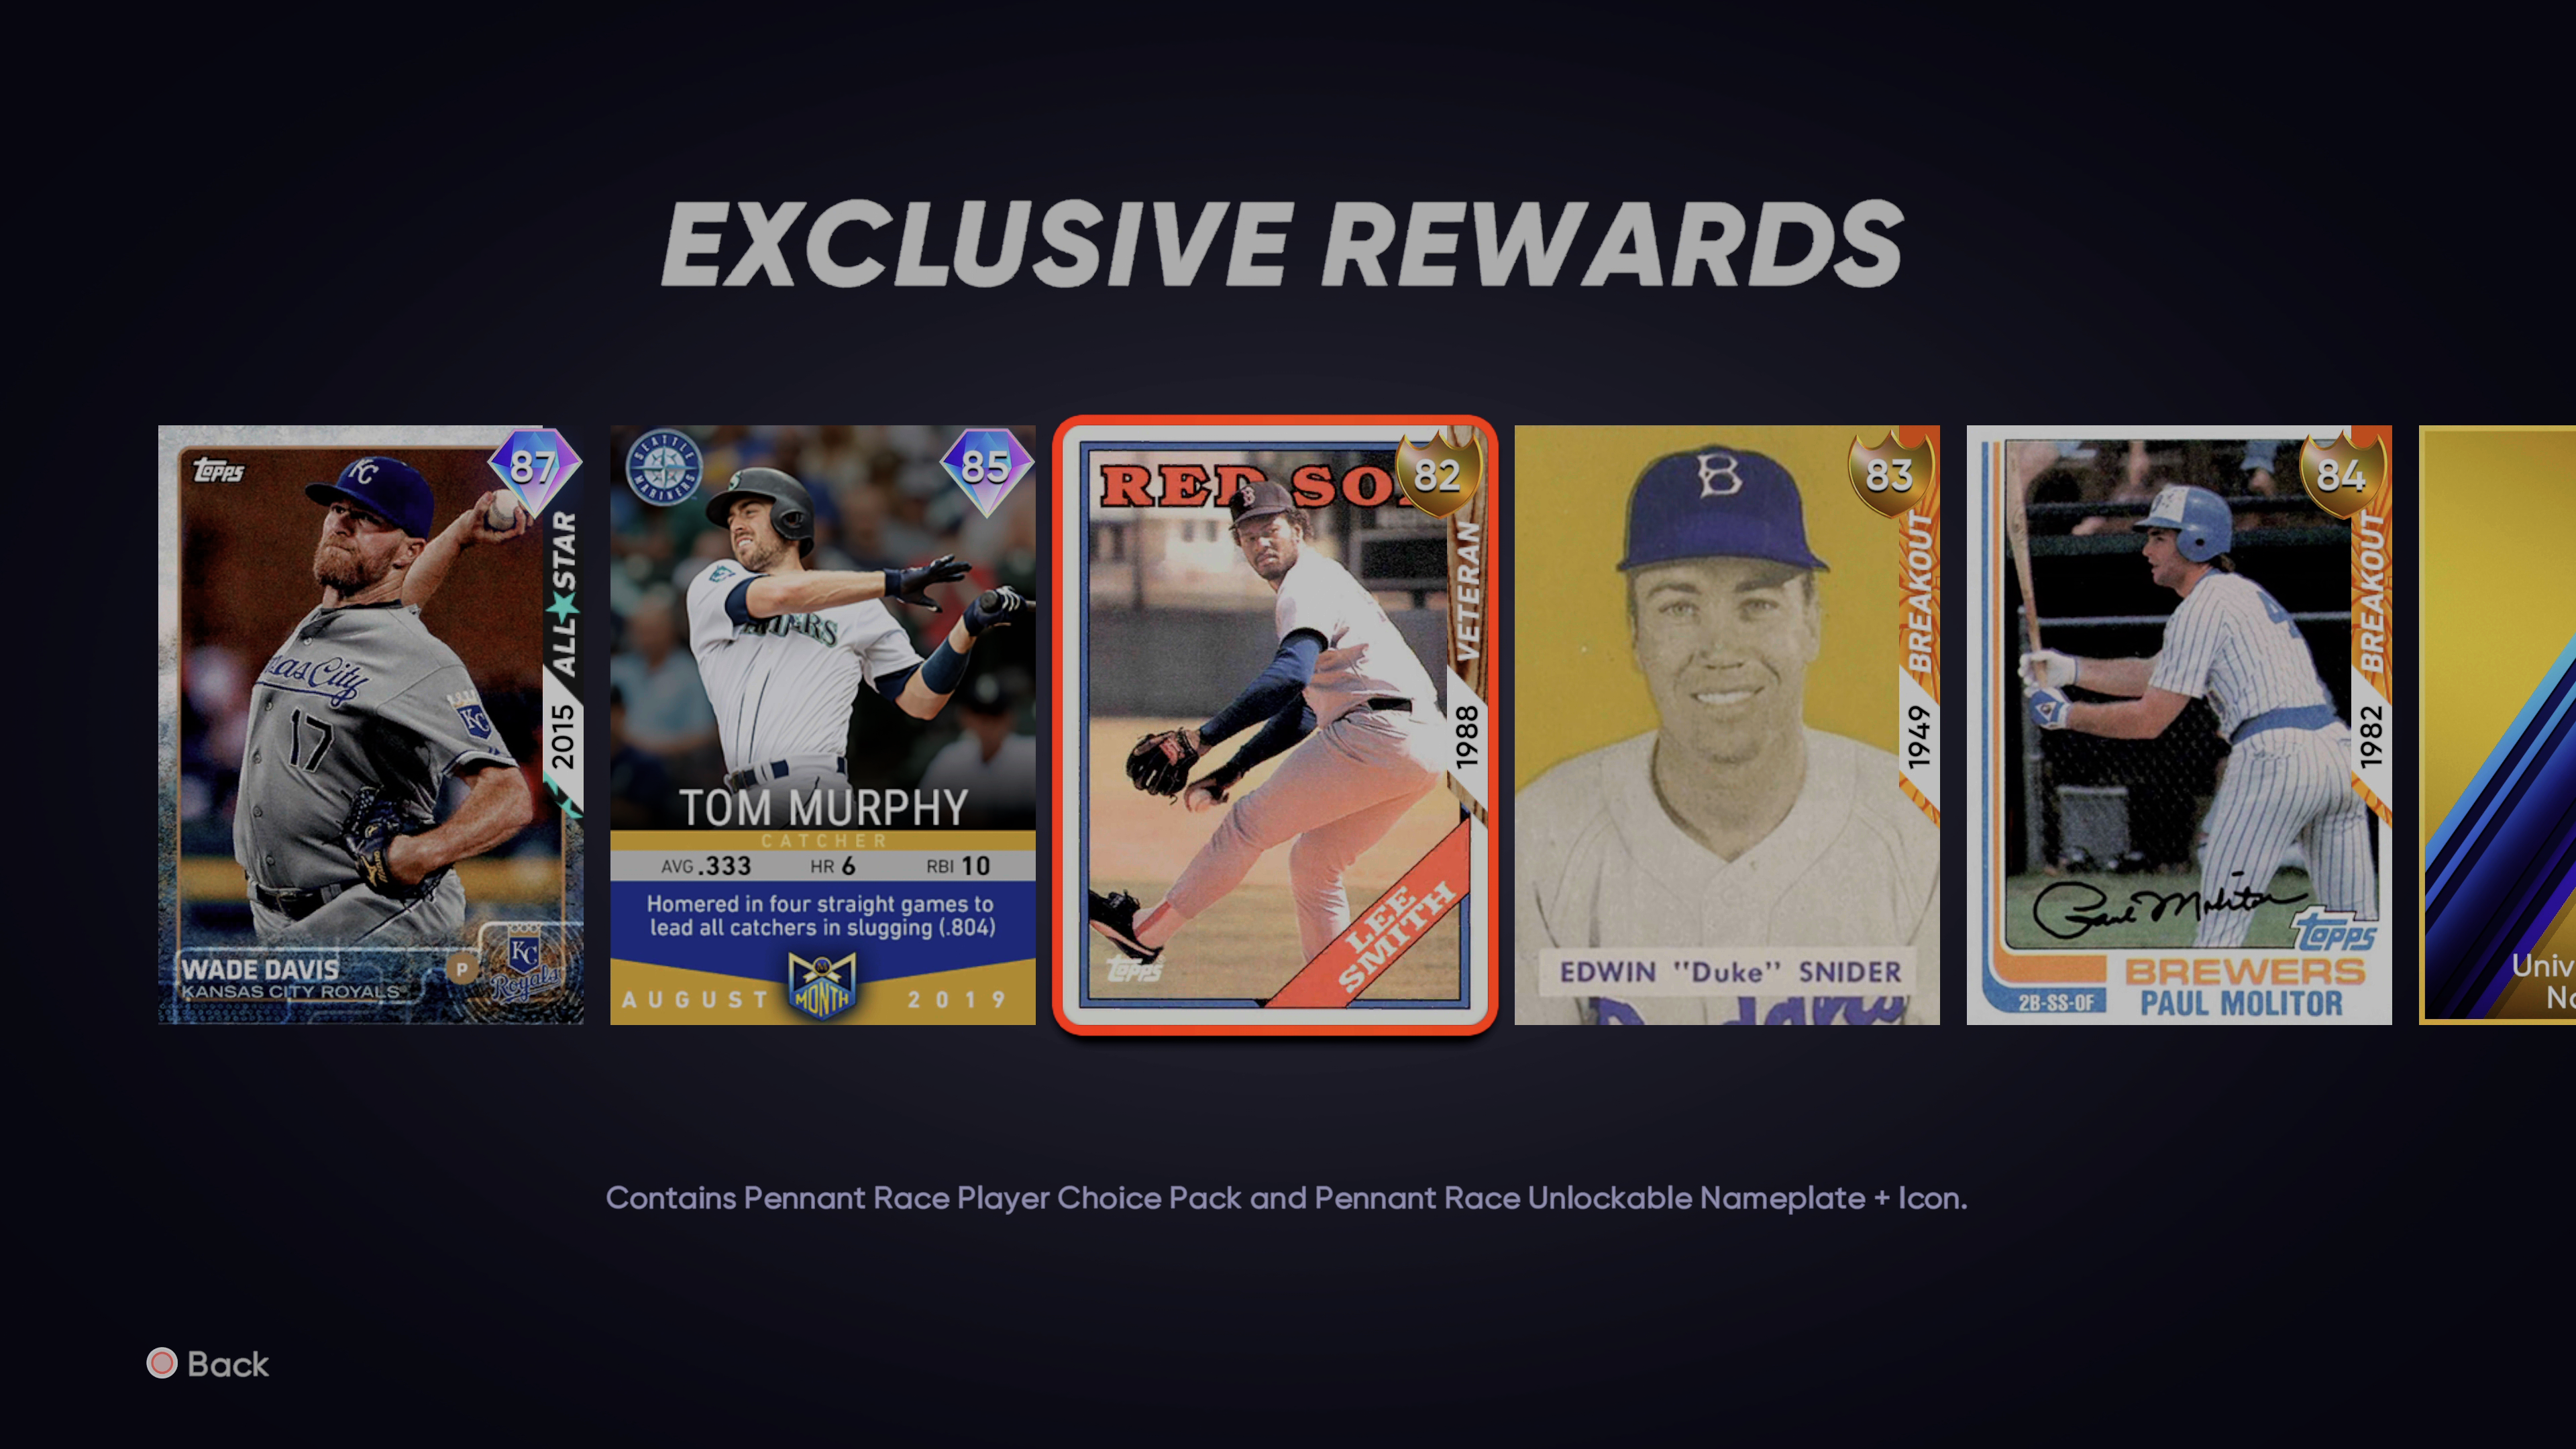 MLB The Show 20 Ranked Season 2 Rewards: 💎Zach Britton and NEW LEGEND, 💎Tino  Martinez! Available NOW in the World Series Pack #TheShow20 #…